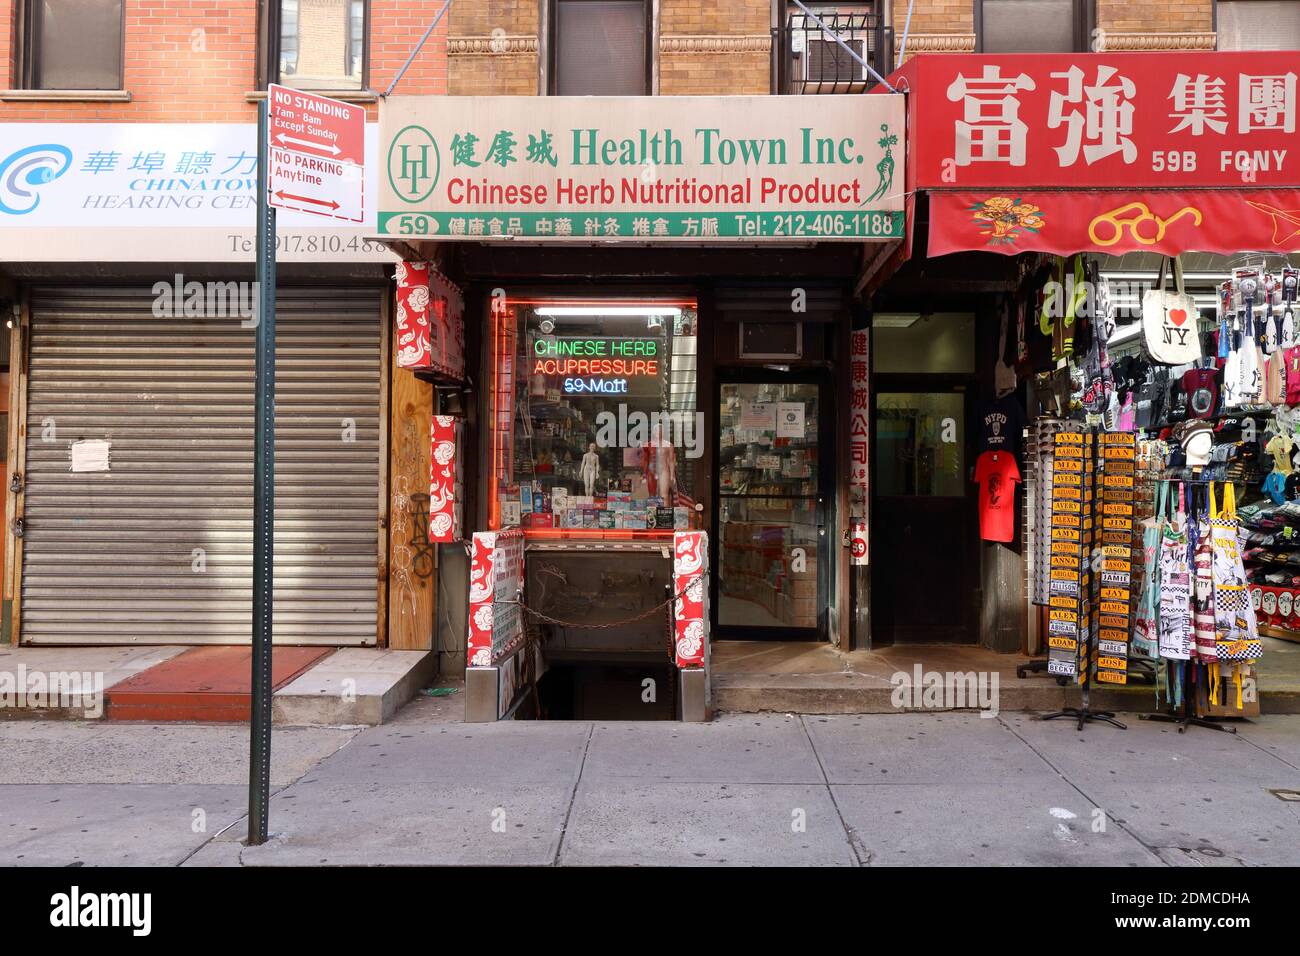 Health Town Inc 健康城, 59 Mott St, New York, NYC storefront photo of a Chinese herbal medicine shop in Manhattan Chinatown. Stock Photo